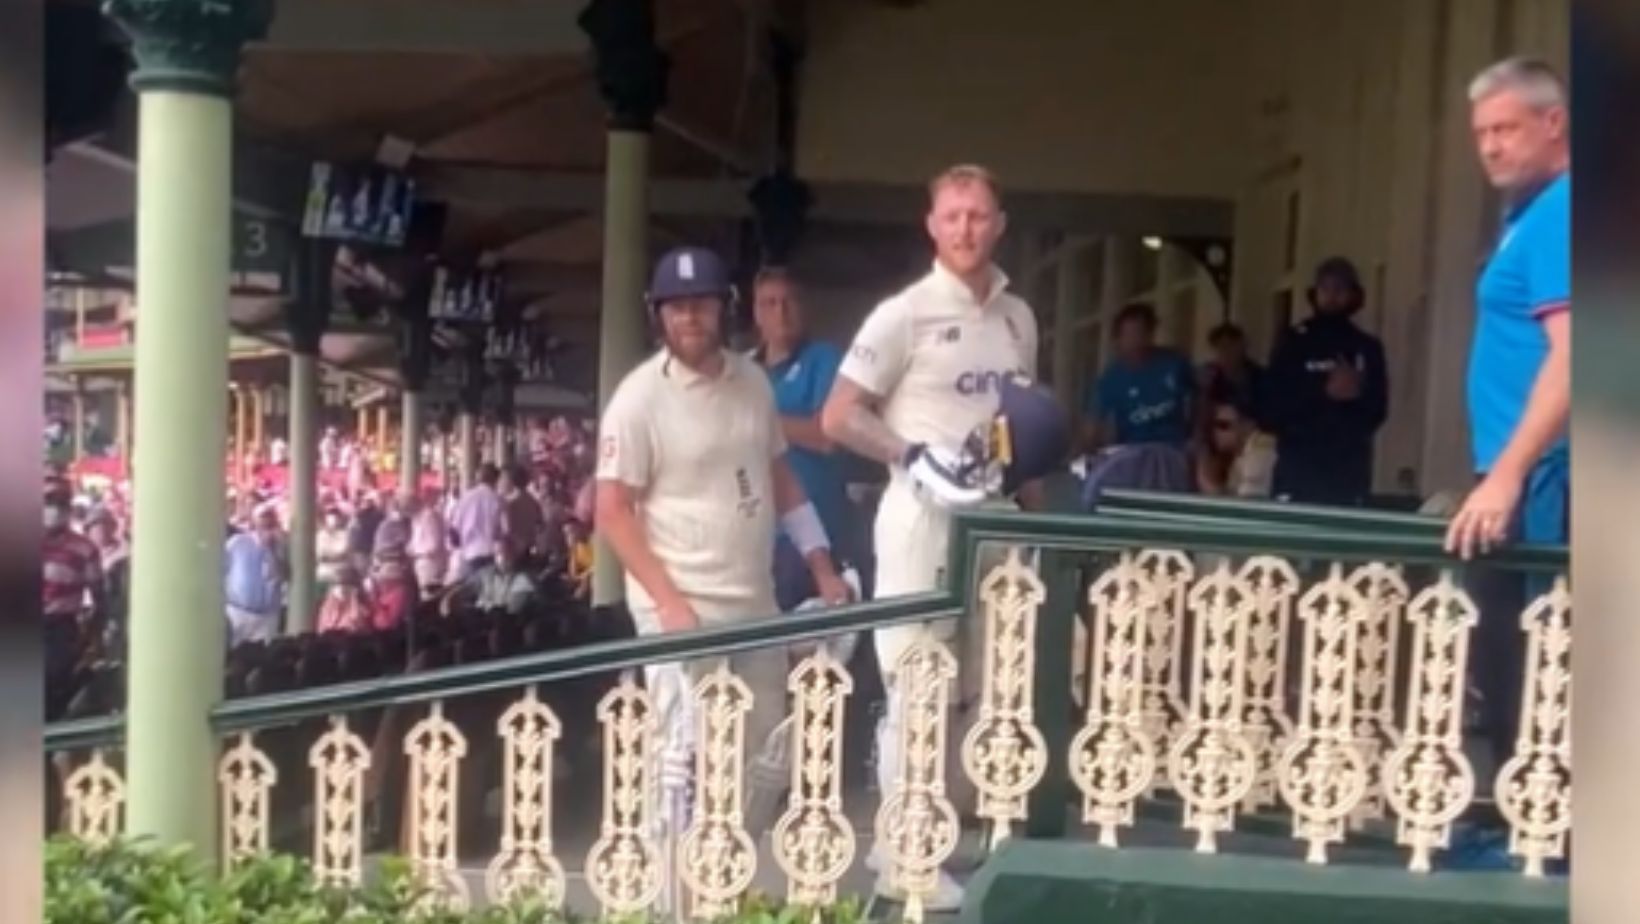 Ben Stokes (R) and Jonny Bairstow confront abusing fans in Sydney. (PC: The Age and the Herald)